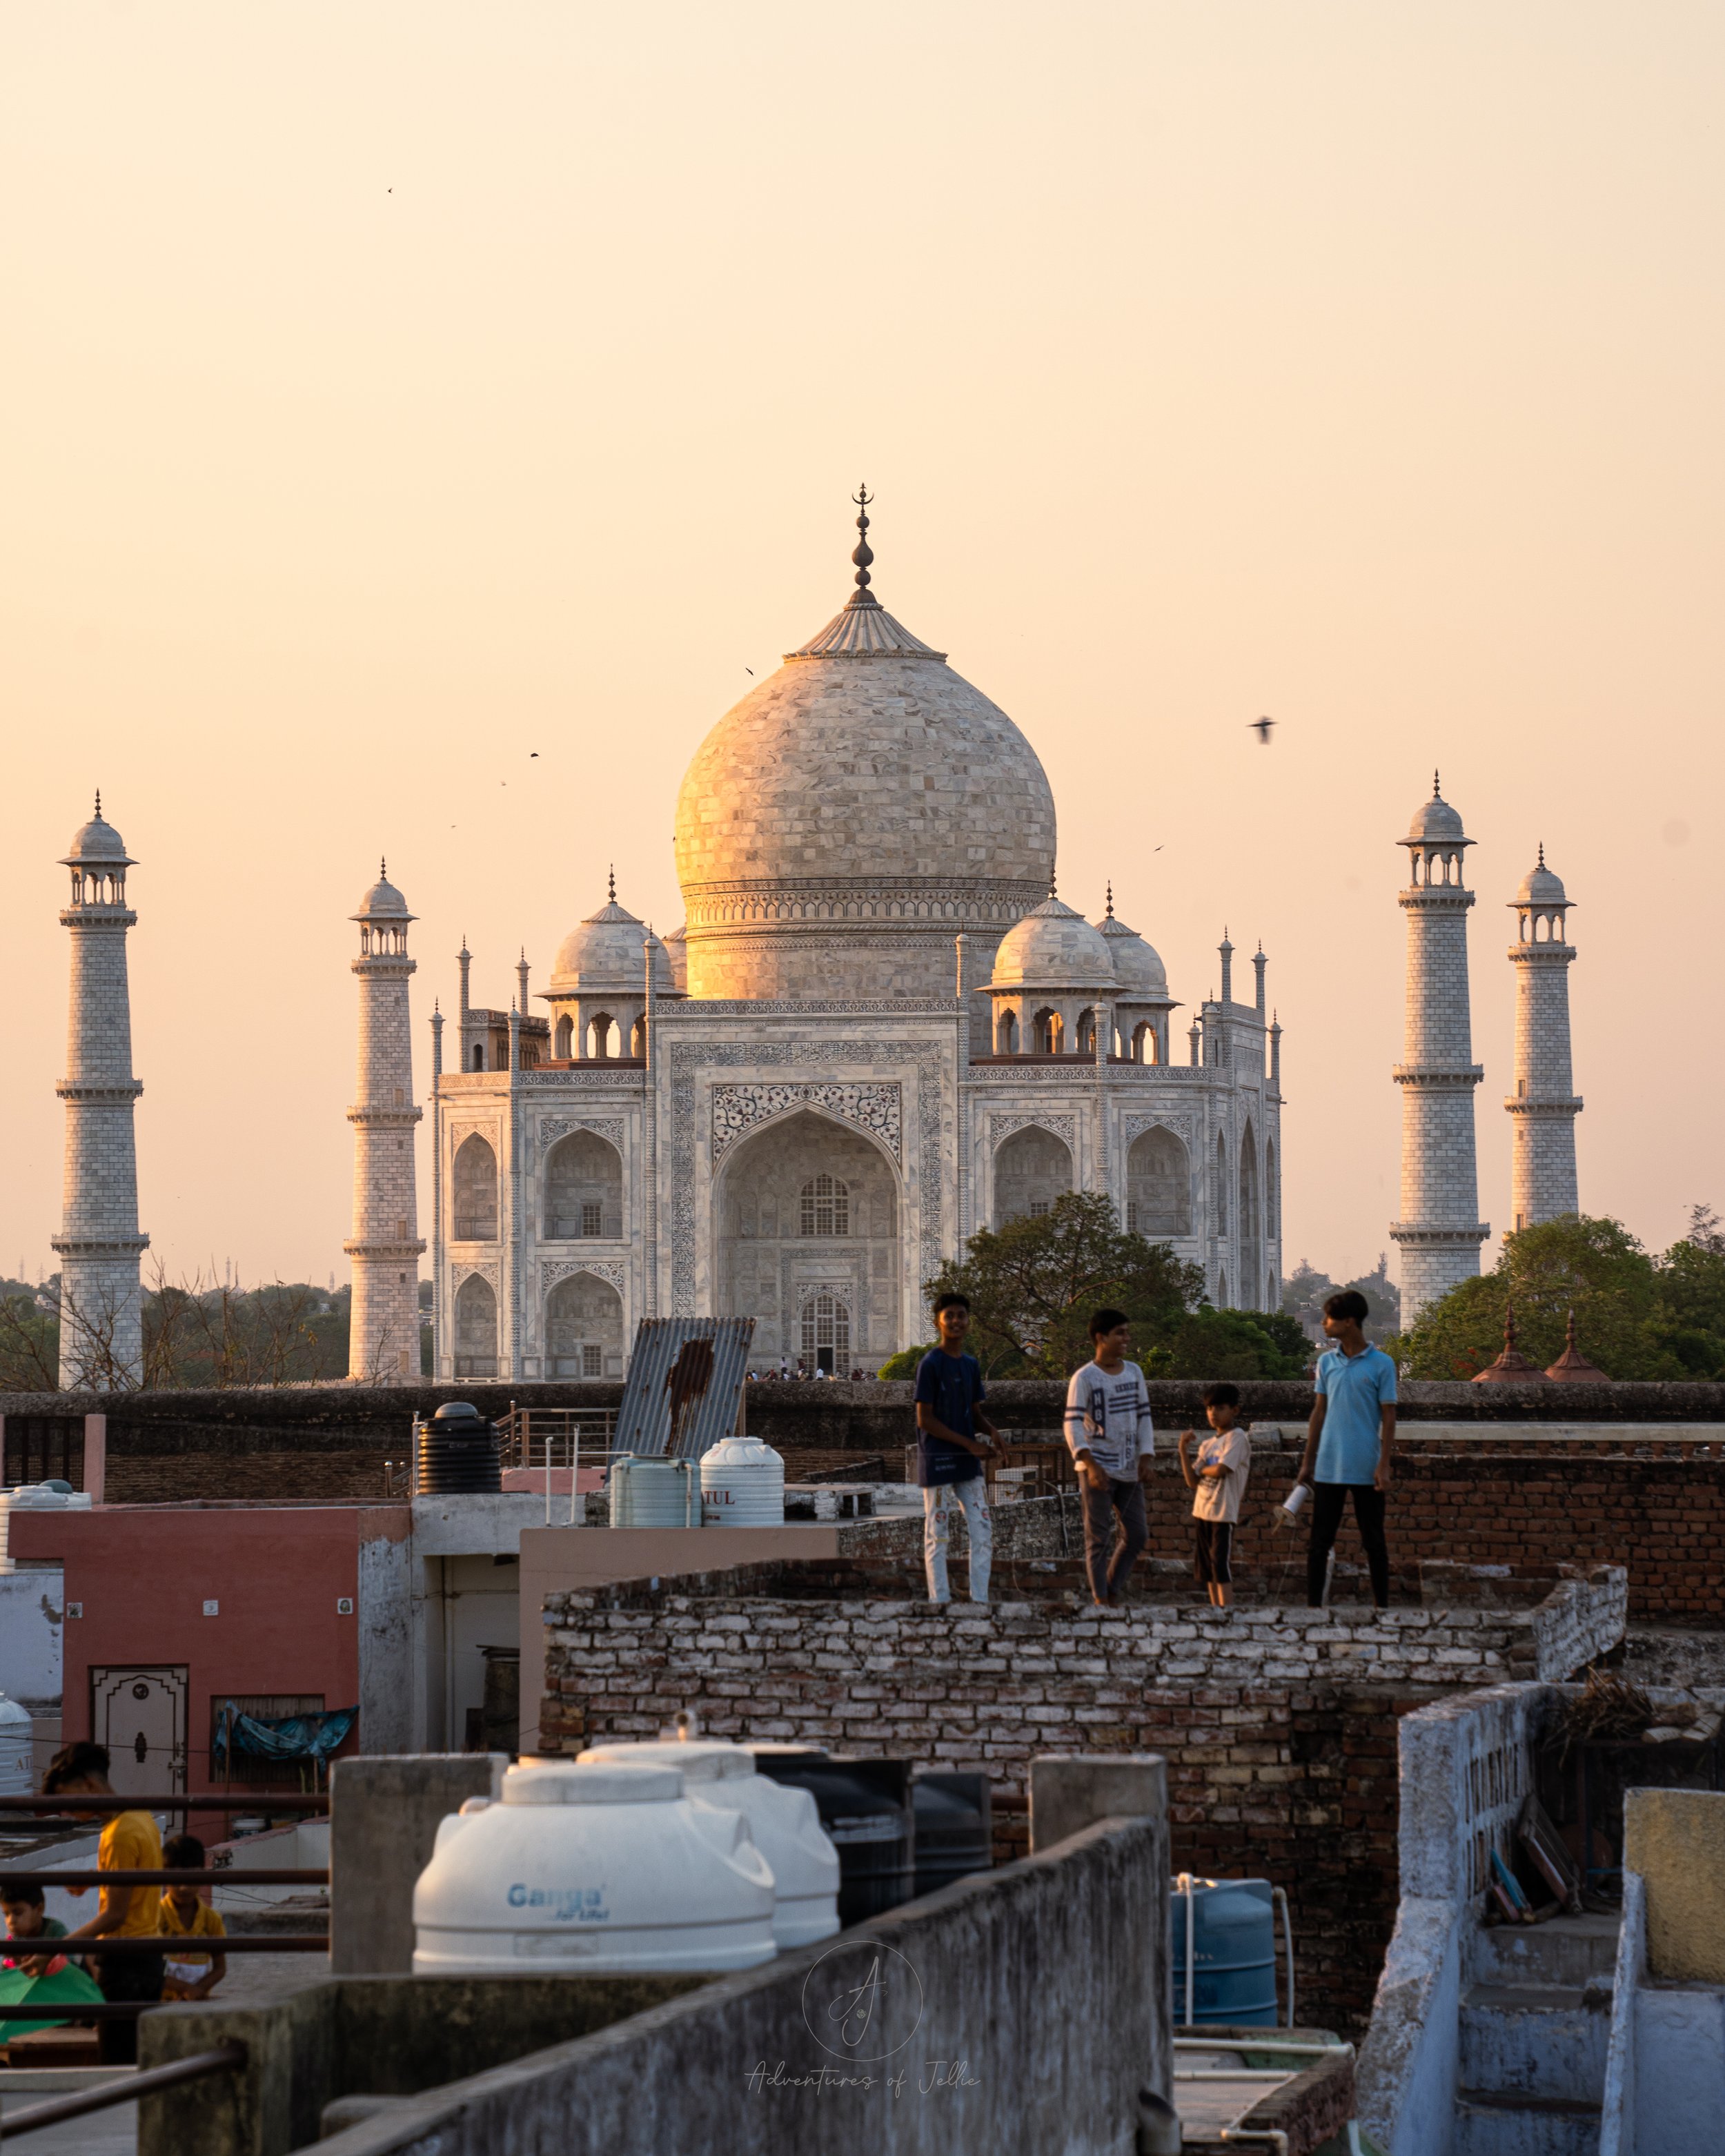 The Best Sunset View of the Taj Mahal - Joey's Hostel Agra